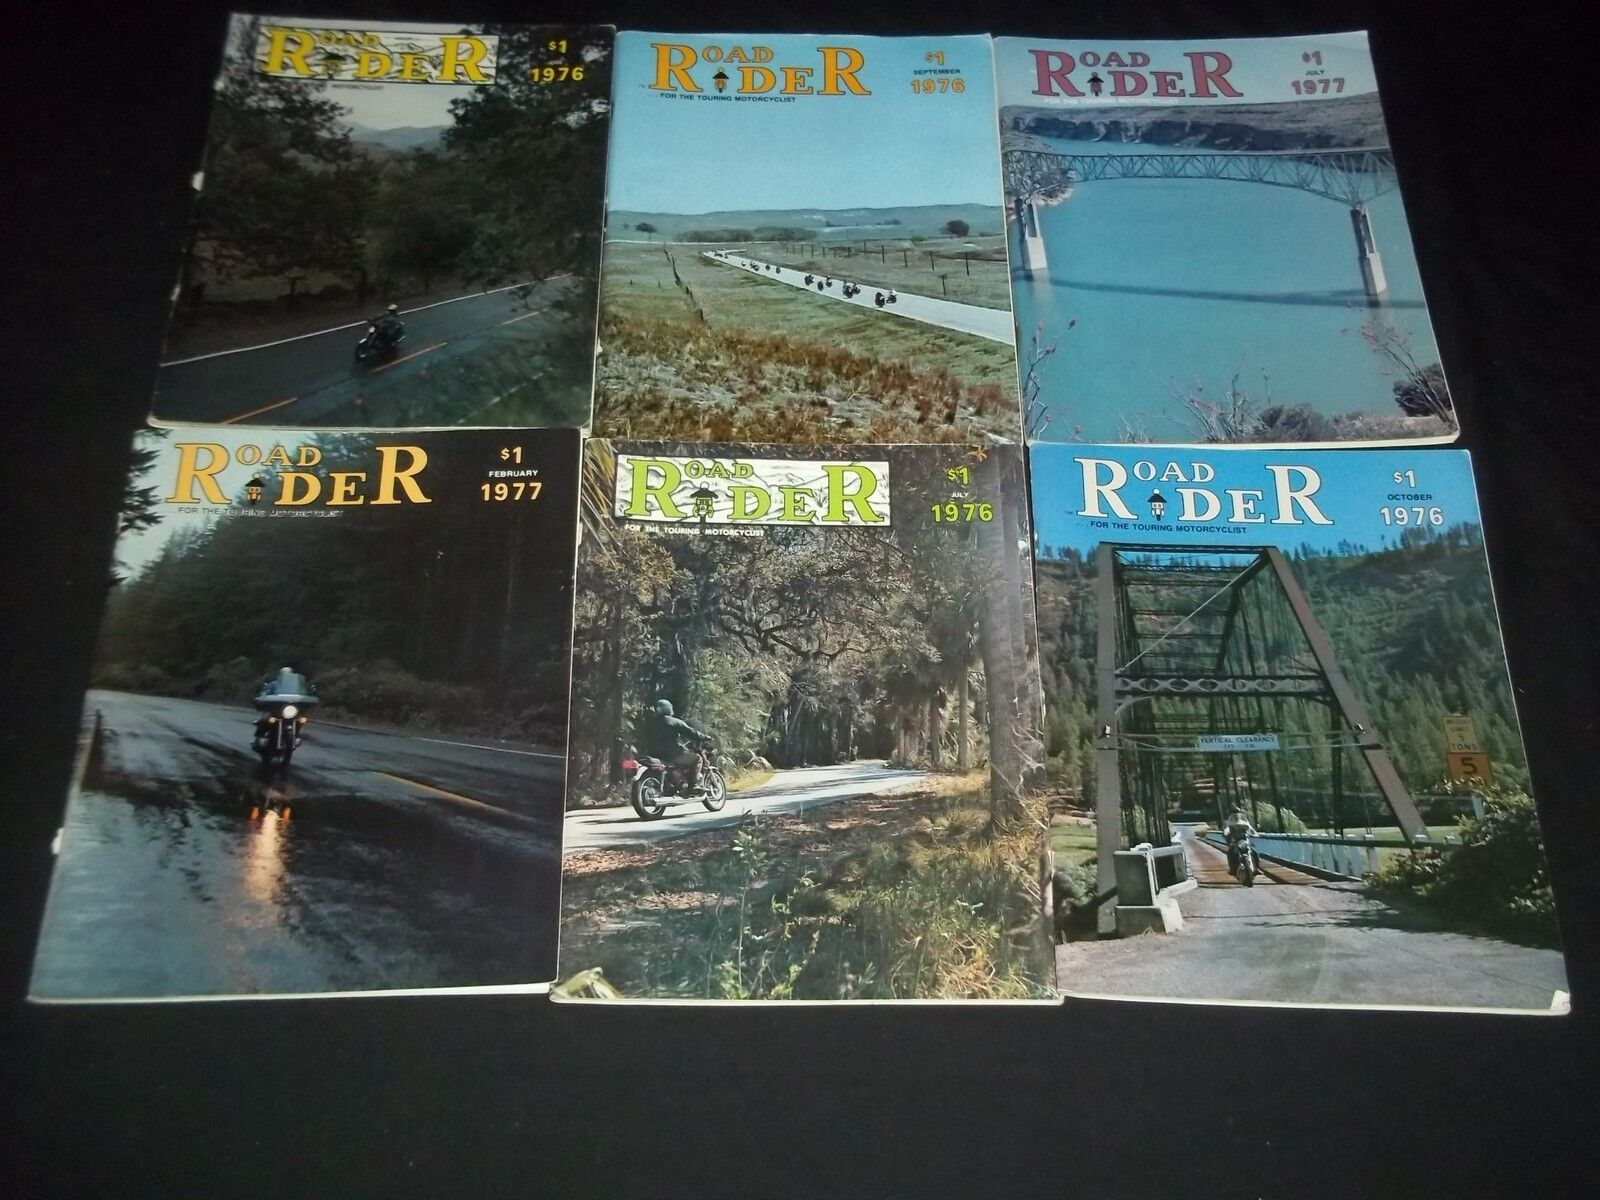 1974-1977 ROAD RIDER MAGAZINE LOT OF 10 ISSUES - NICE COVERS - M 601